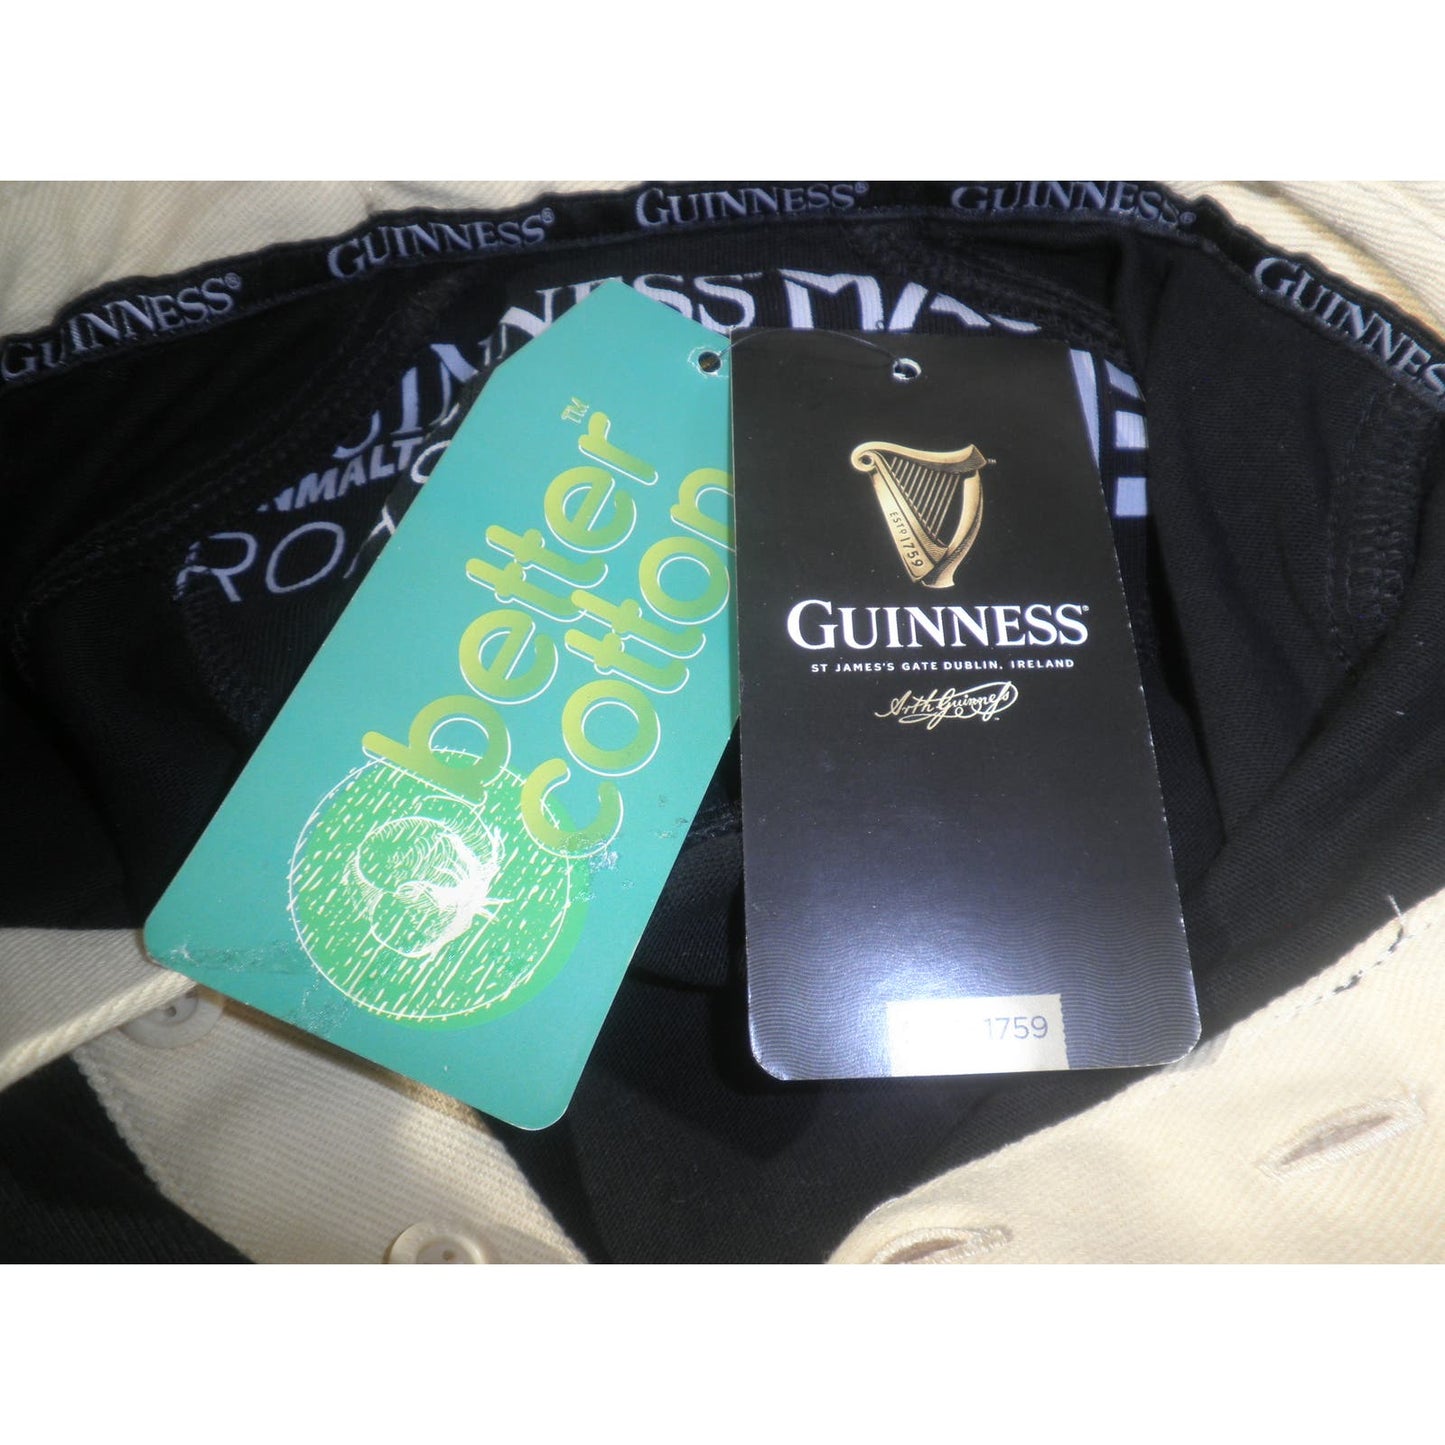 Guinness Traditional Black and Cream Long-Sleeve Rugby Jersey, XL, 100% Cotton